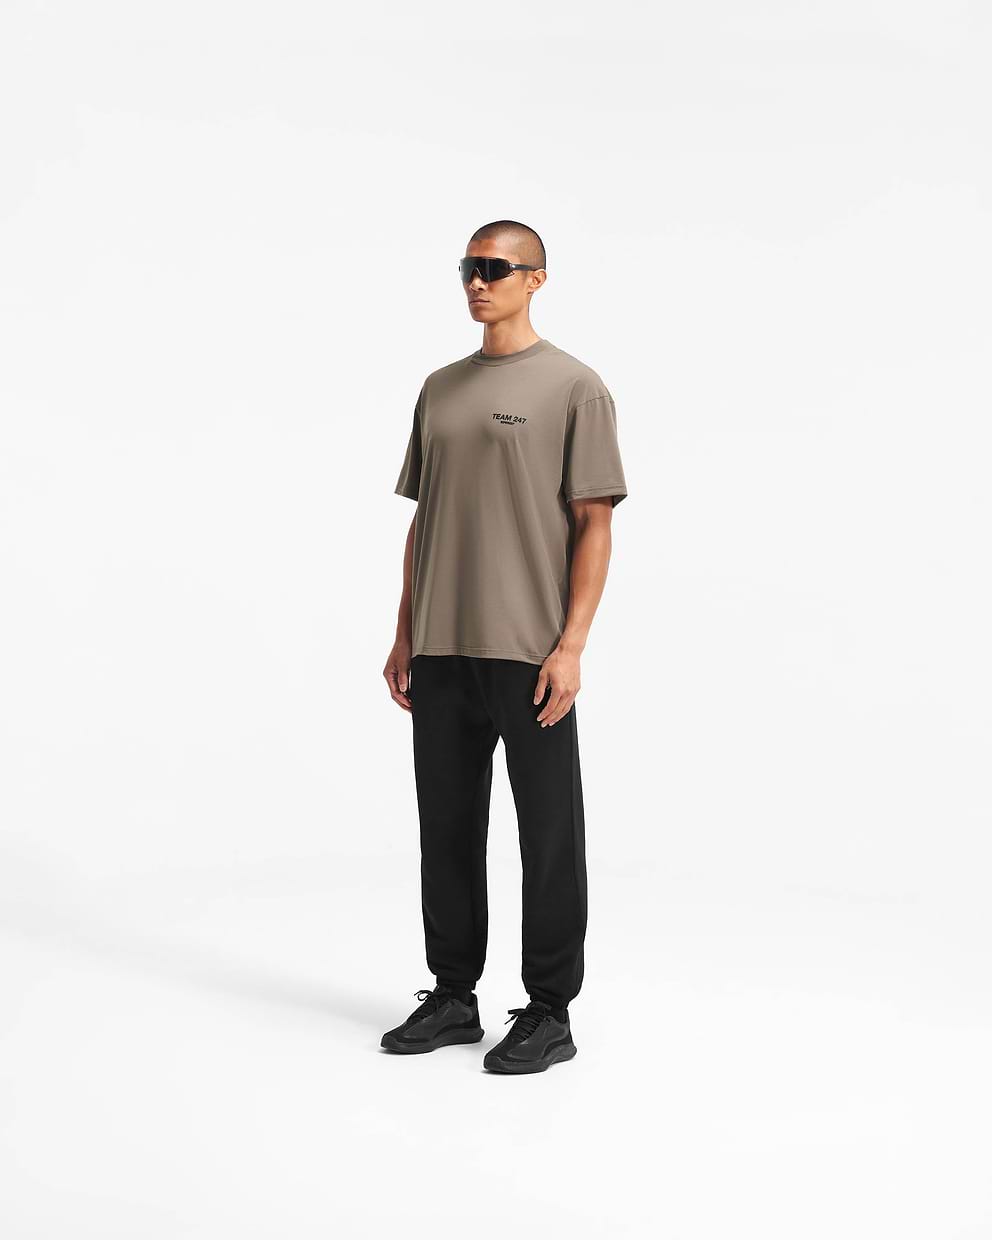 Team 247 Oversized T-Shirt - Army